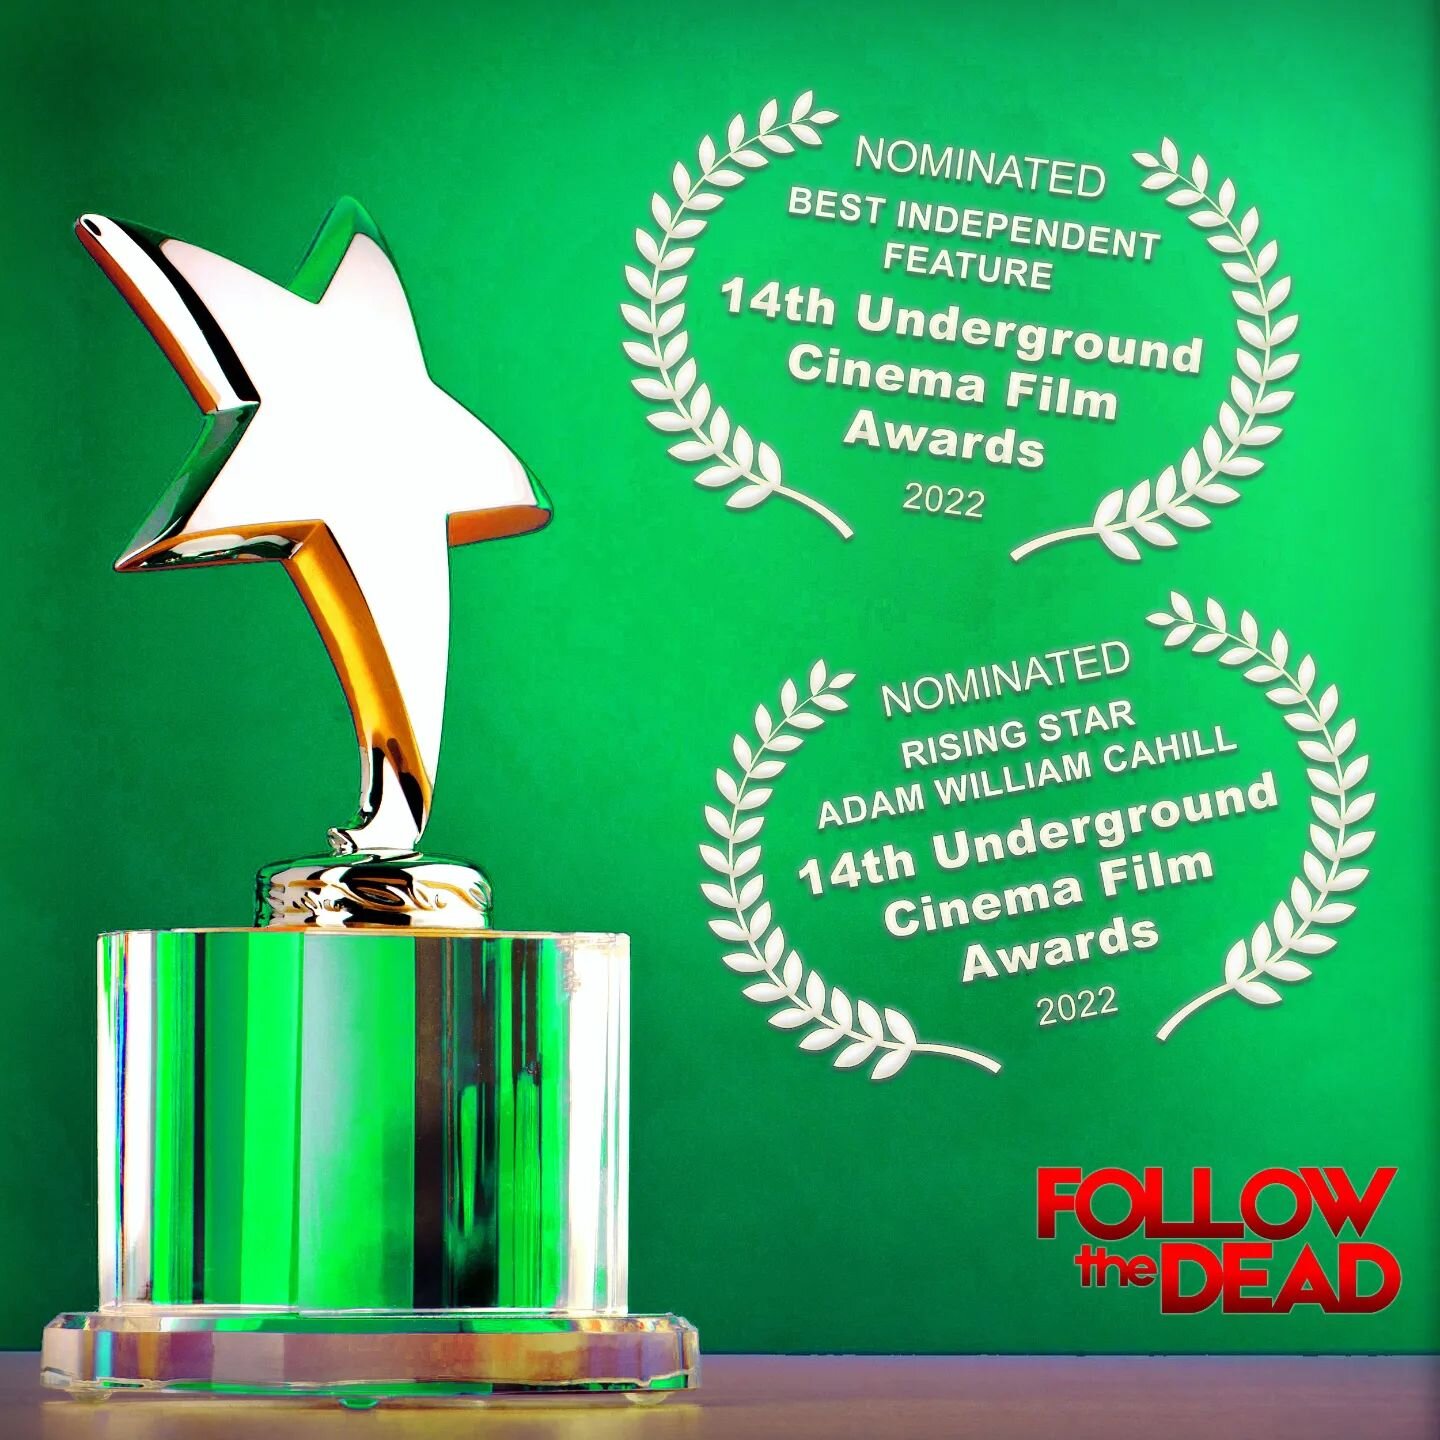 ✨ A NIGHT TO REMEMBER 🤵 

Now that we're back to base camp, we thought we'd do this the right way...

Once again, the Follow the Dead team are absolutely thrilled to have two nominations at the 14th Underground Cinema Film Awards. For those of us th